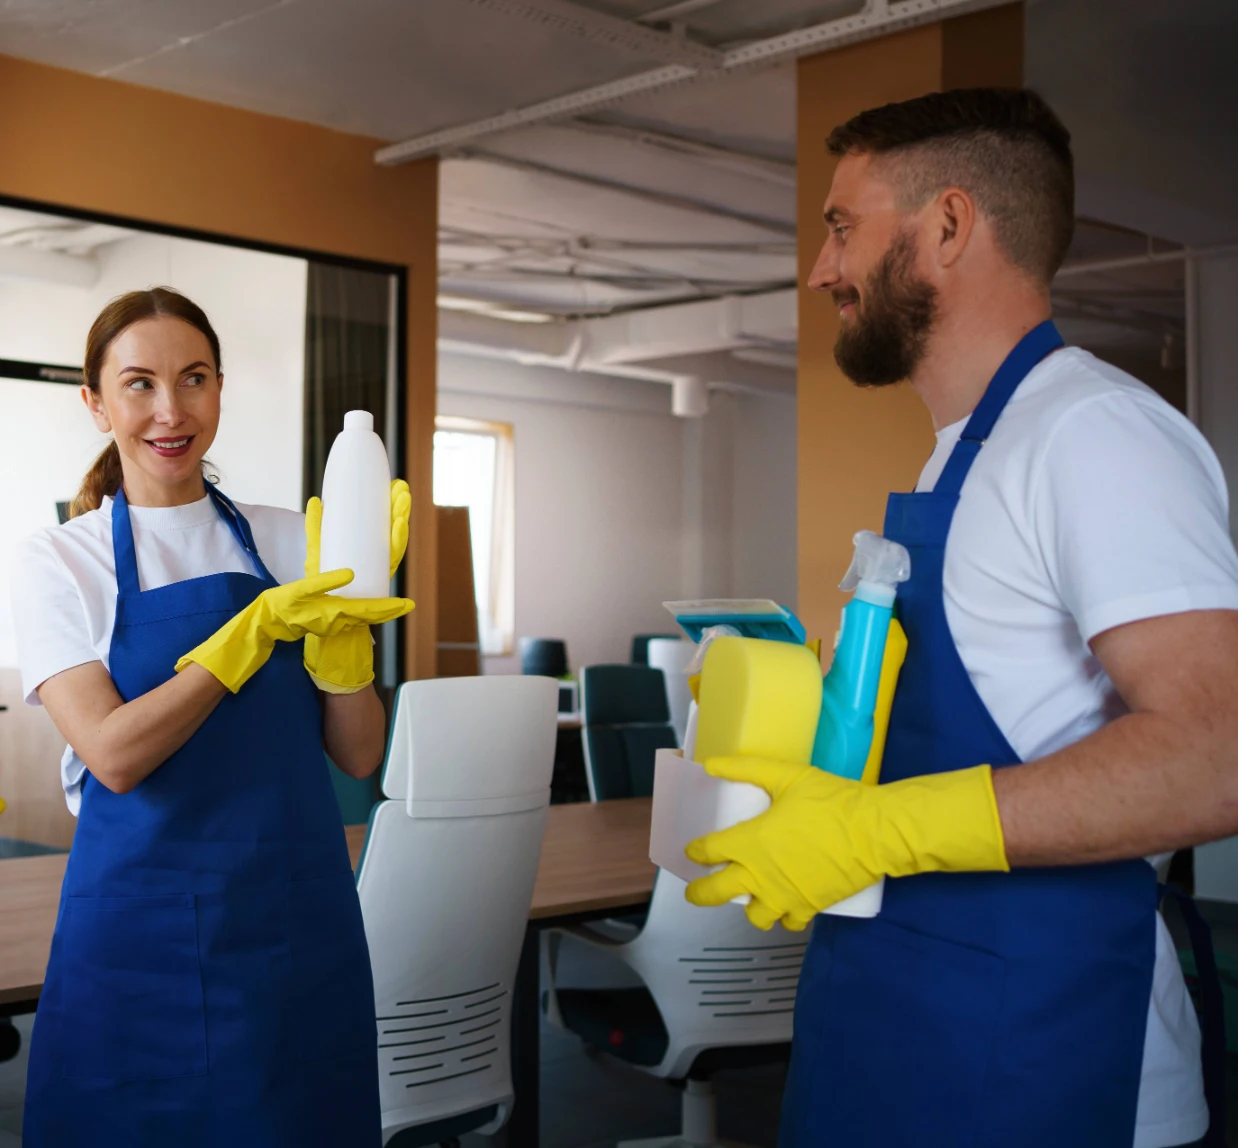 professional cleaning service people working together in Denver